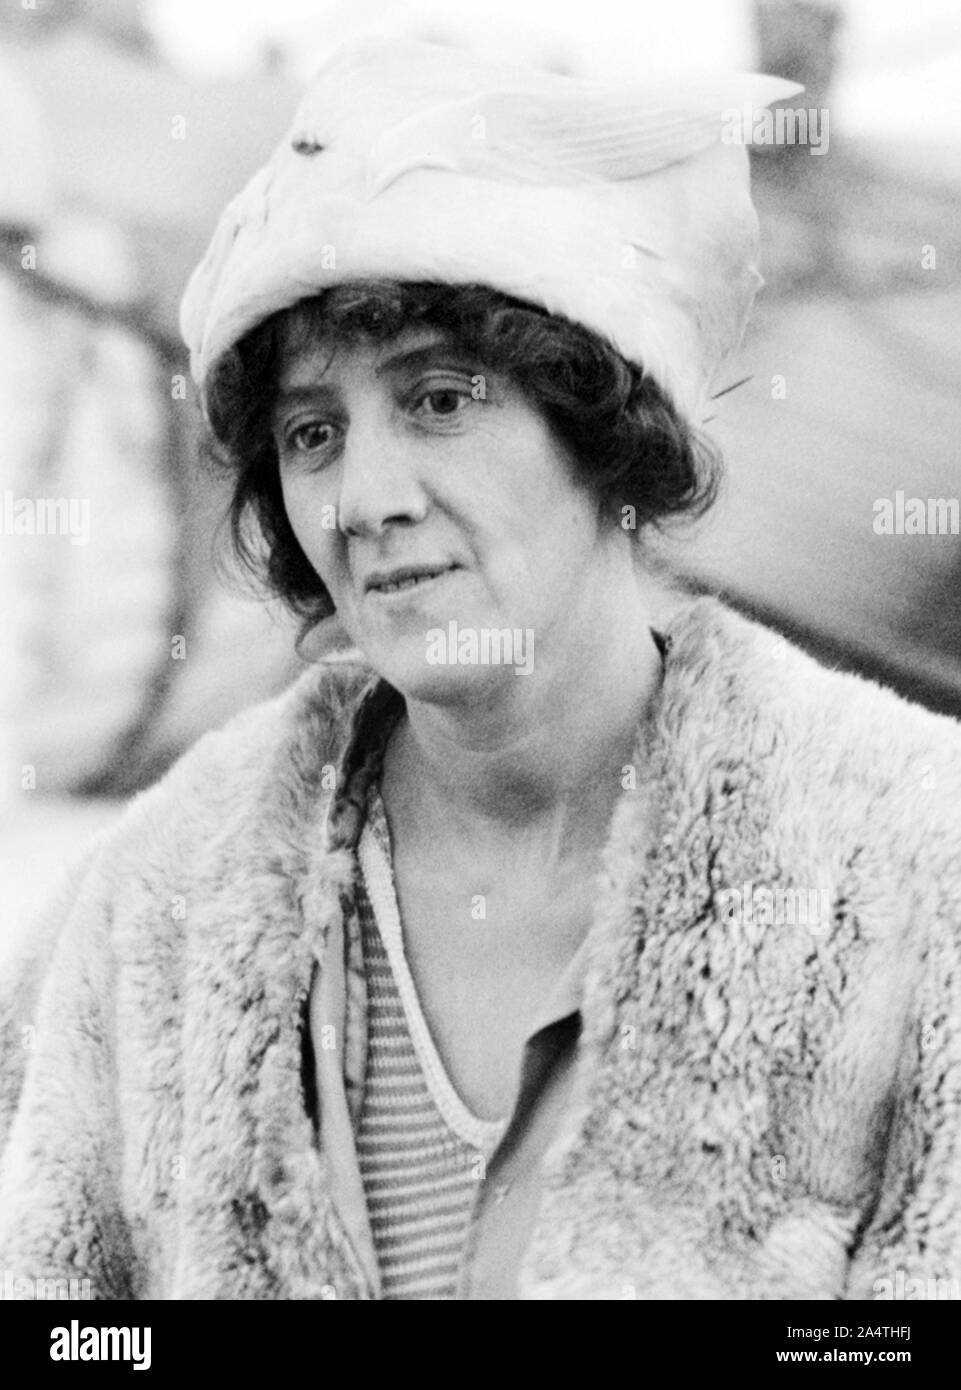 Vintage photo of British author, palaeobotanist, women’s rights campaigner and birth control / family planning pioneer Marie Stopes (1880 – 1958). Photo circa 1920 - 1925 by Bain News Service. Stock Photo